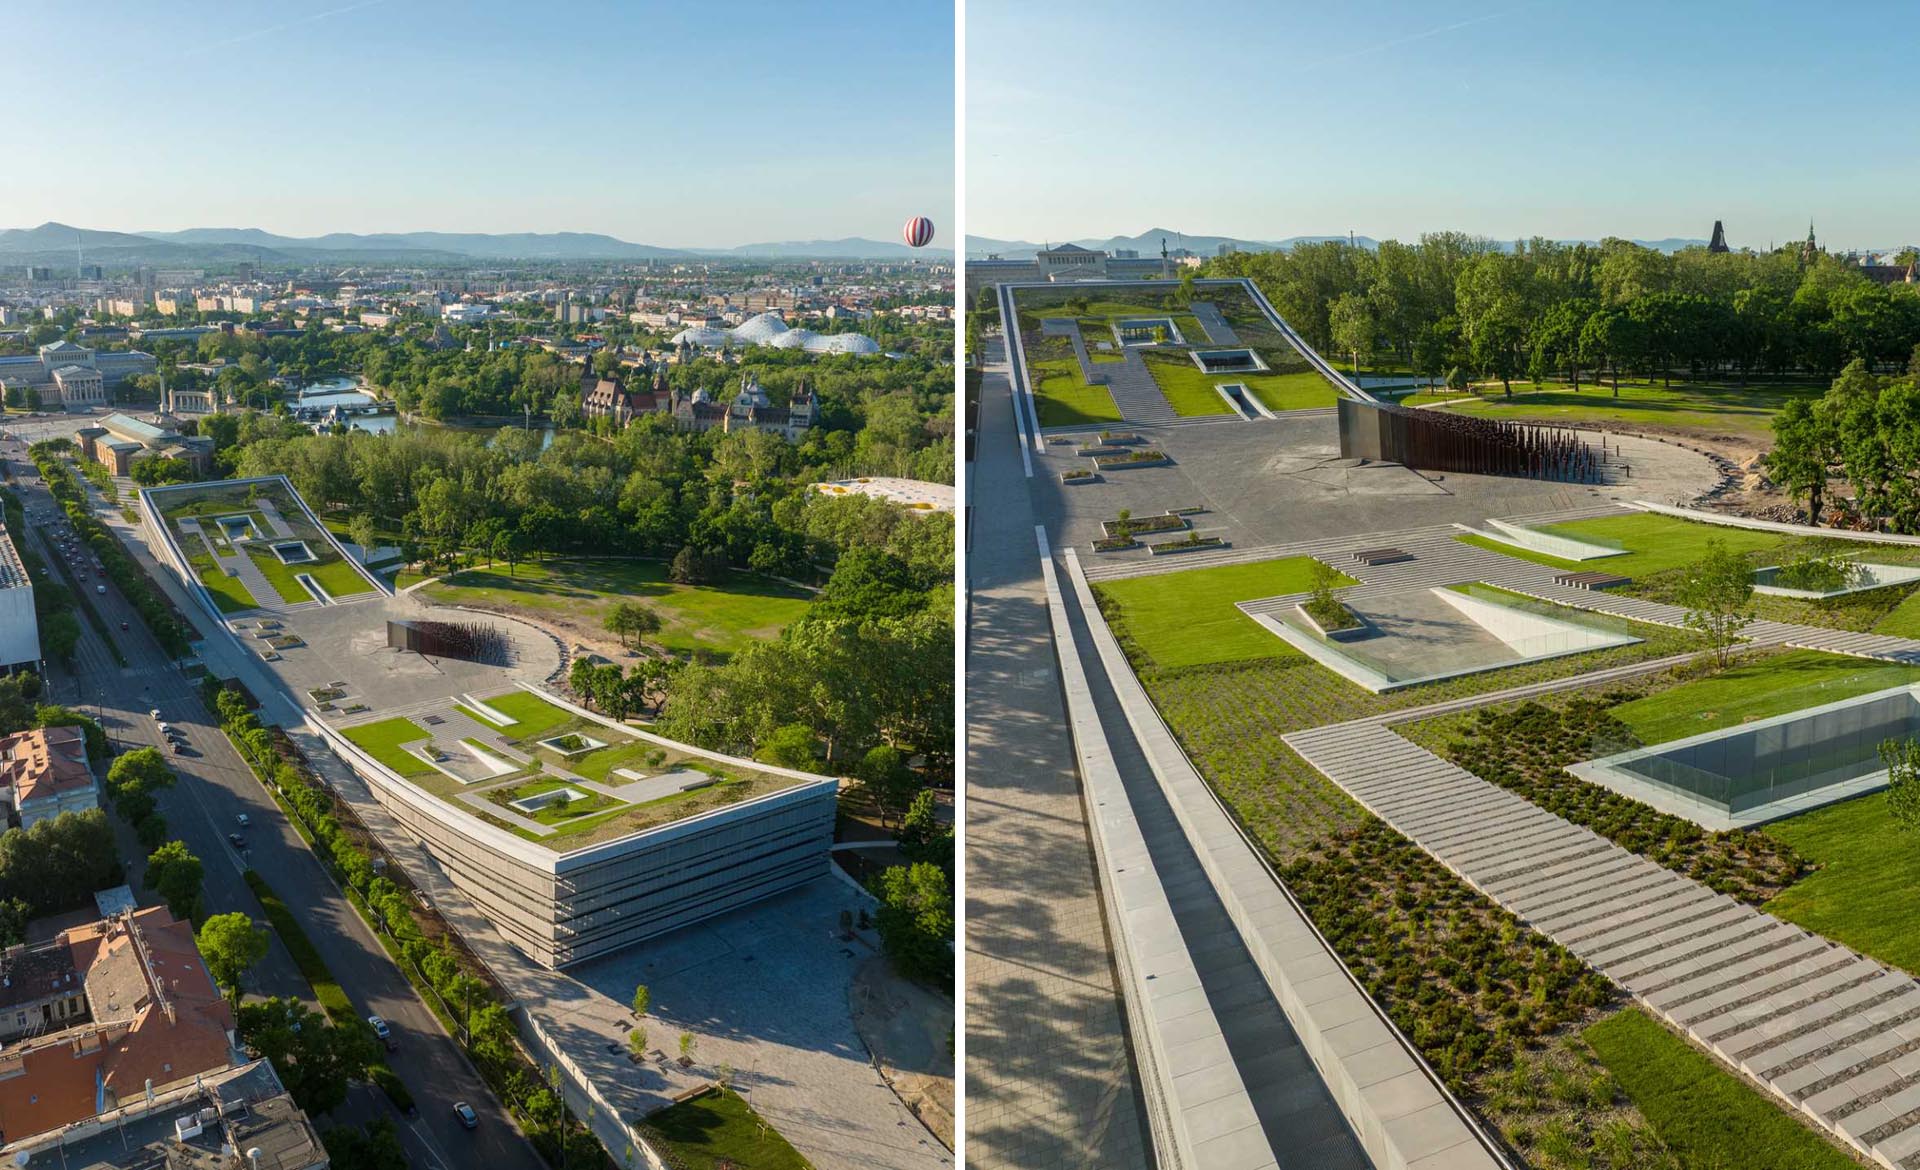 A museum in Hungary has a curved green roof that visitors can enjoy.